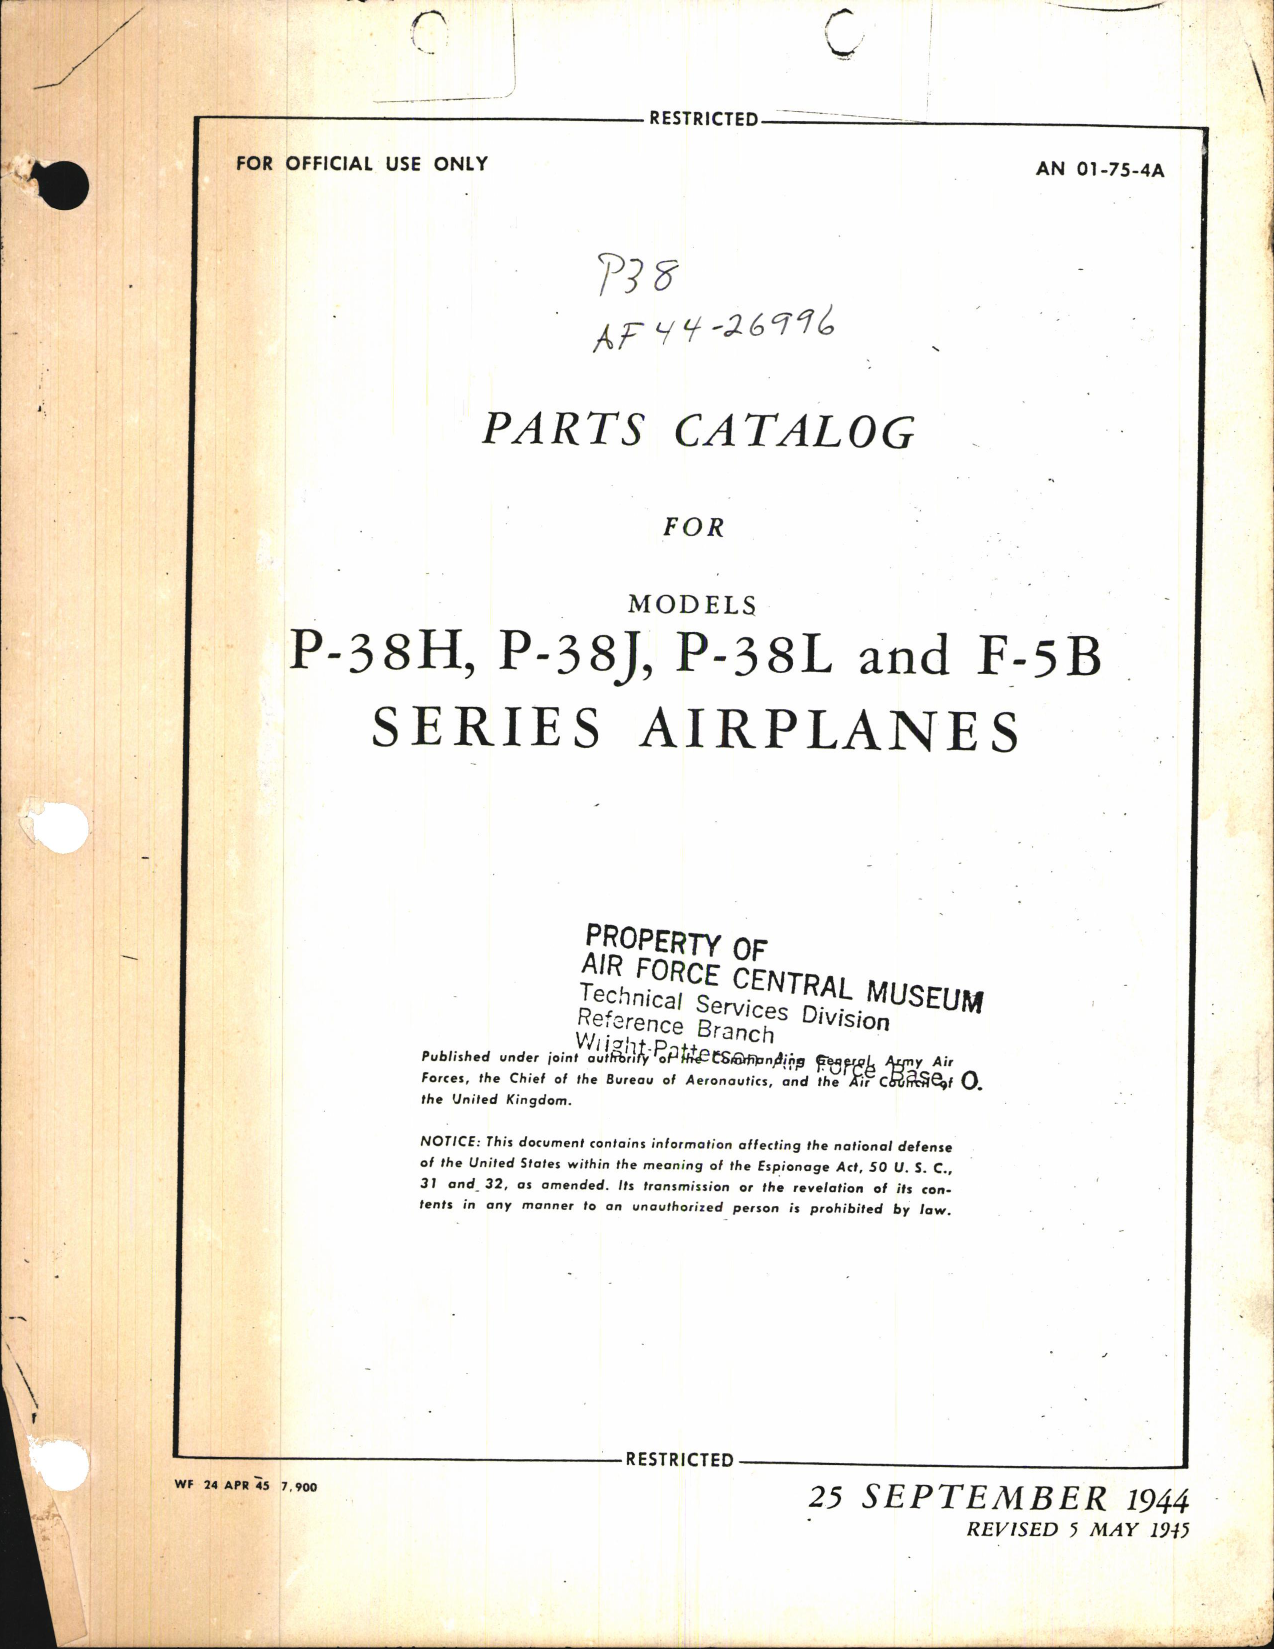 Sample page 1 from AirCorps Library document: Parts Catalog for P-38H, P-38J, P-38L, and F-5B Airplanes